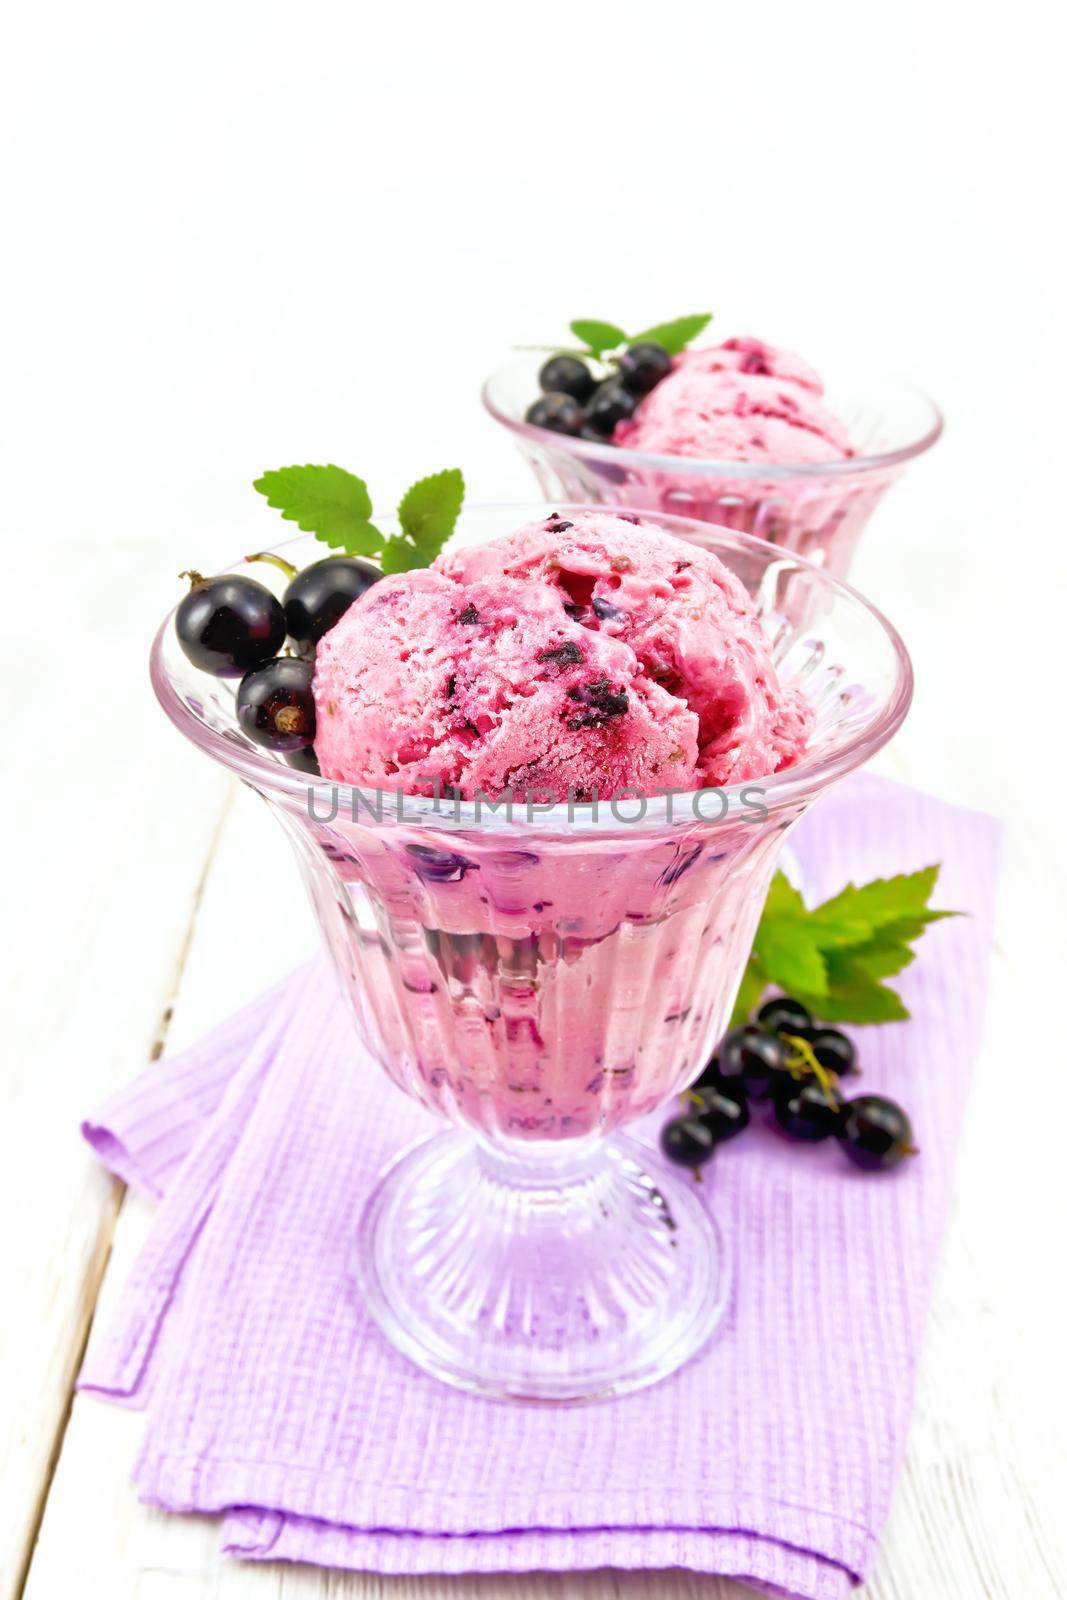 Ice cream with black currant in two glasses on a lilac napkin, berries with leaves against a light wooden board